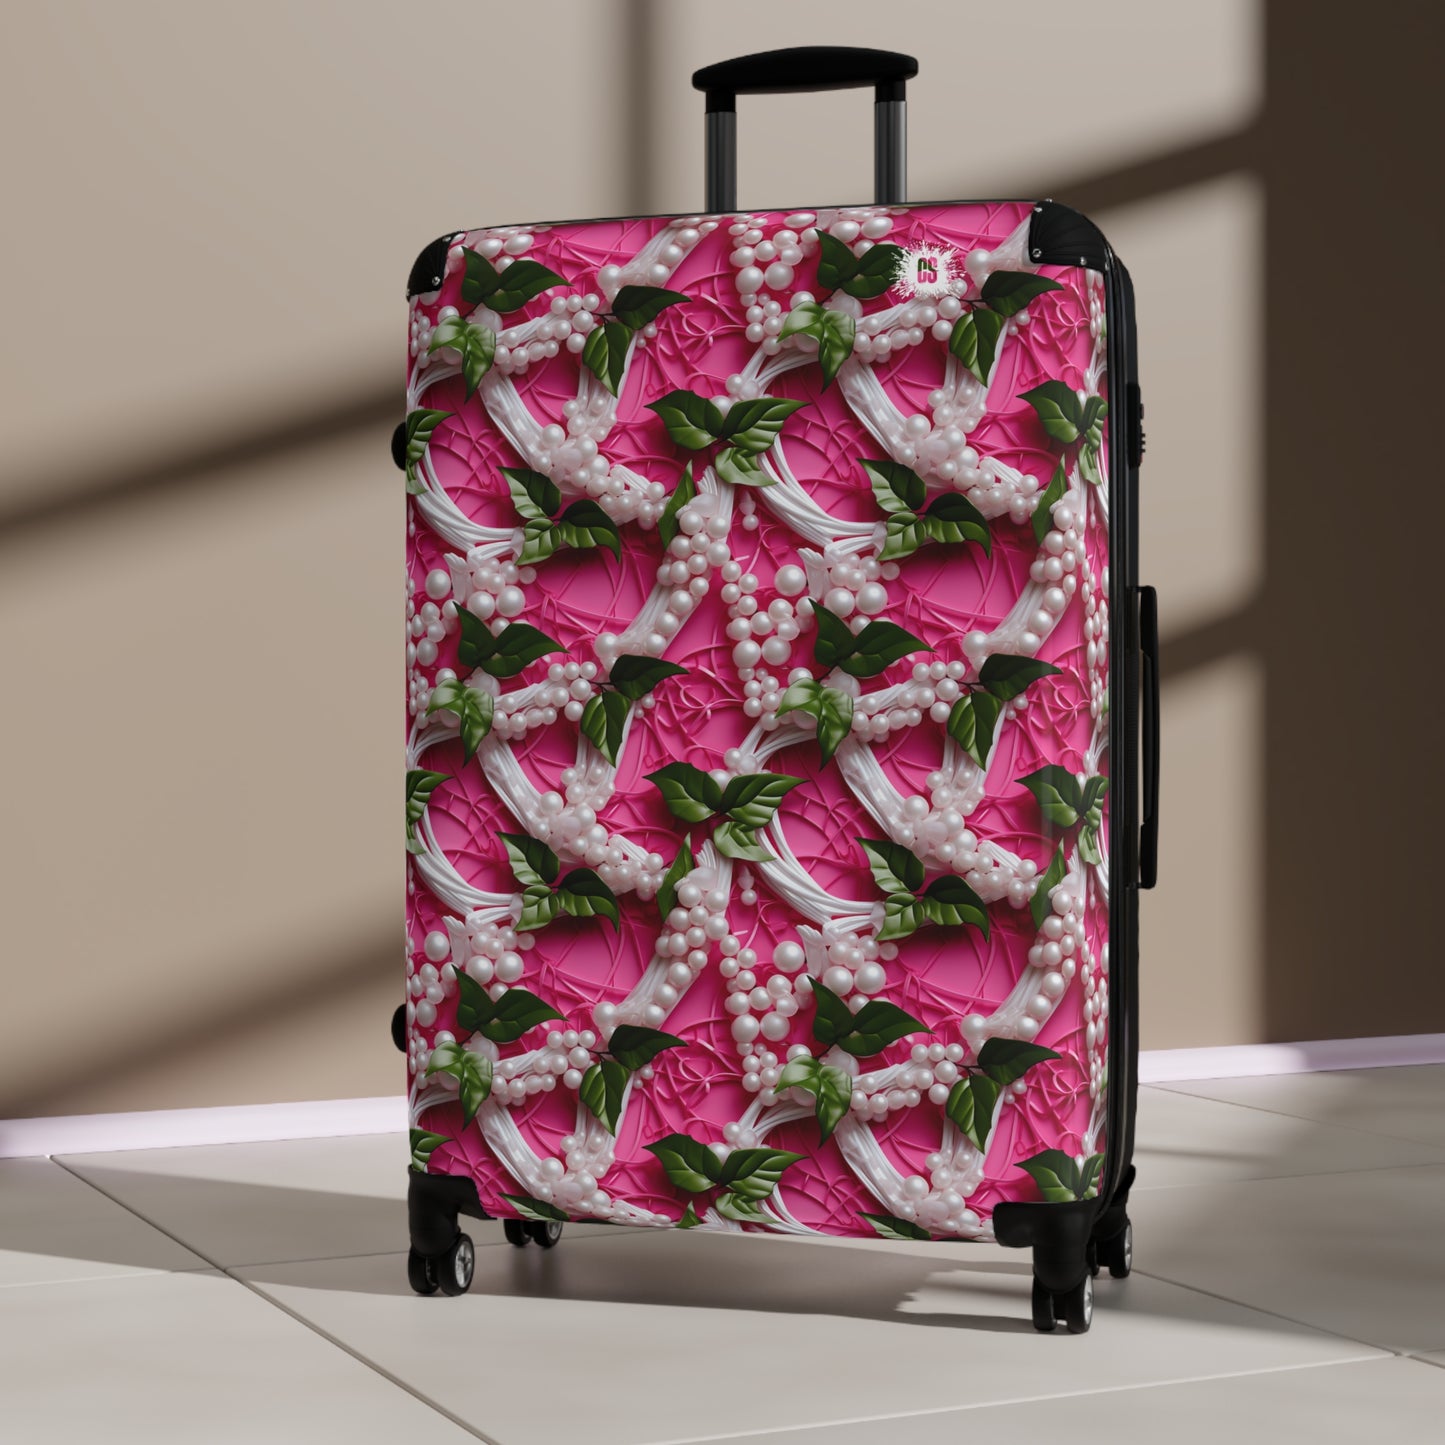 Ivy & Pearls Suitcase